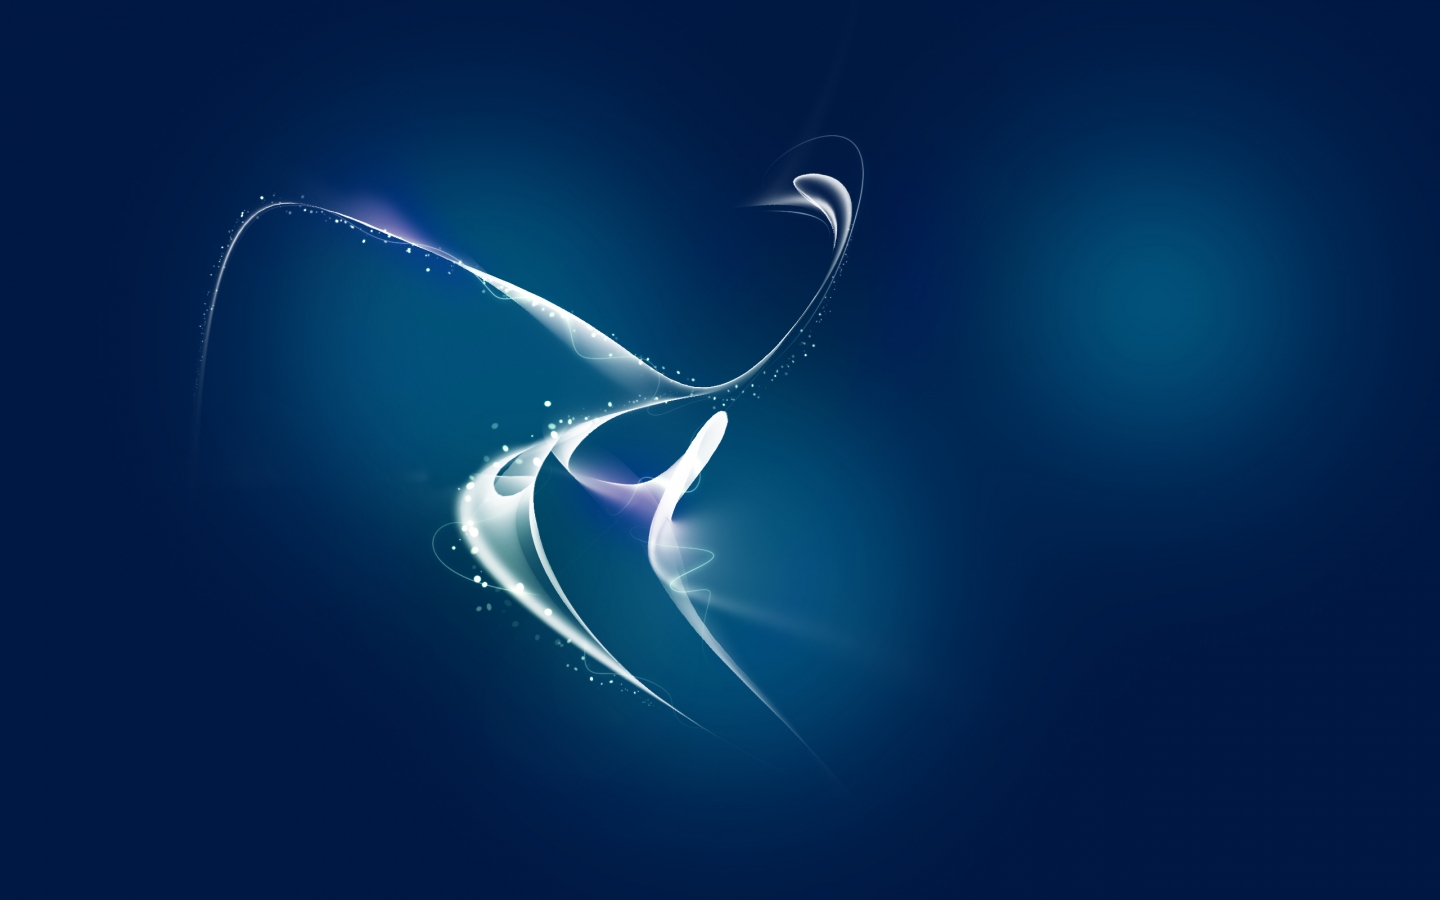 Abstract Design for 1440 x 900 widescreen resolution